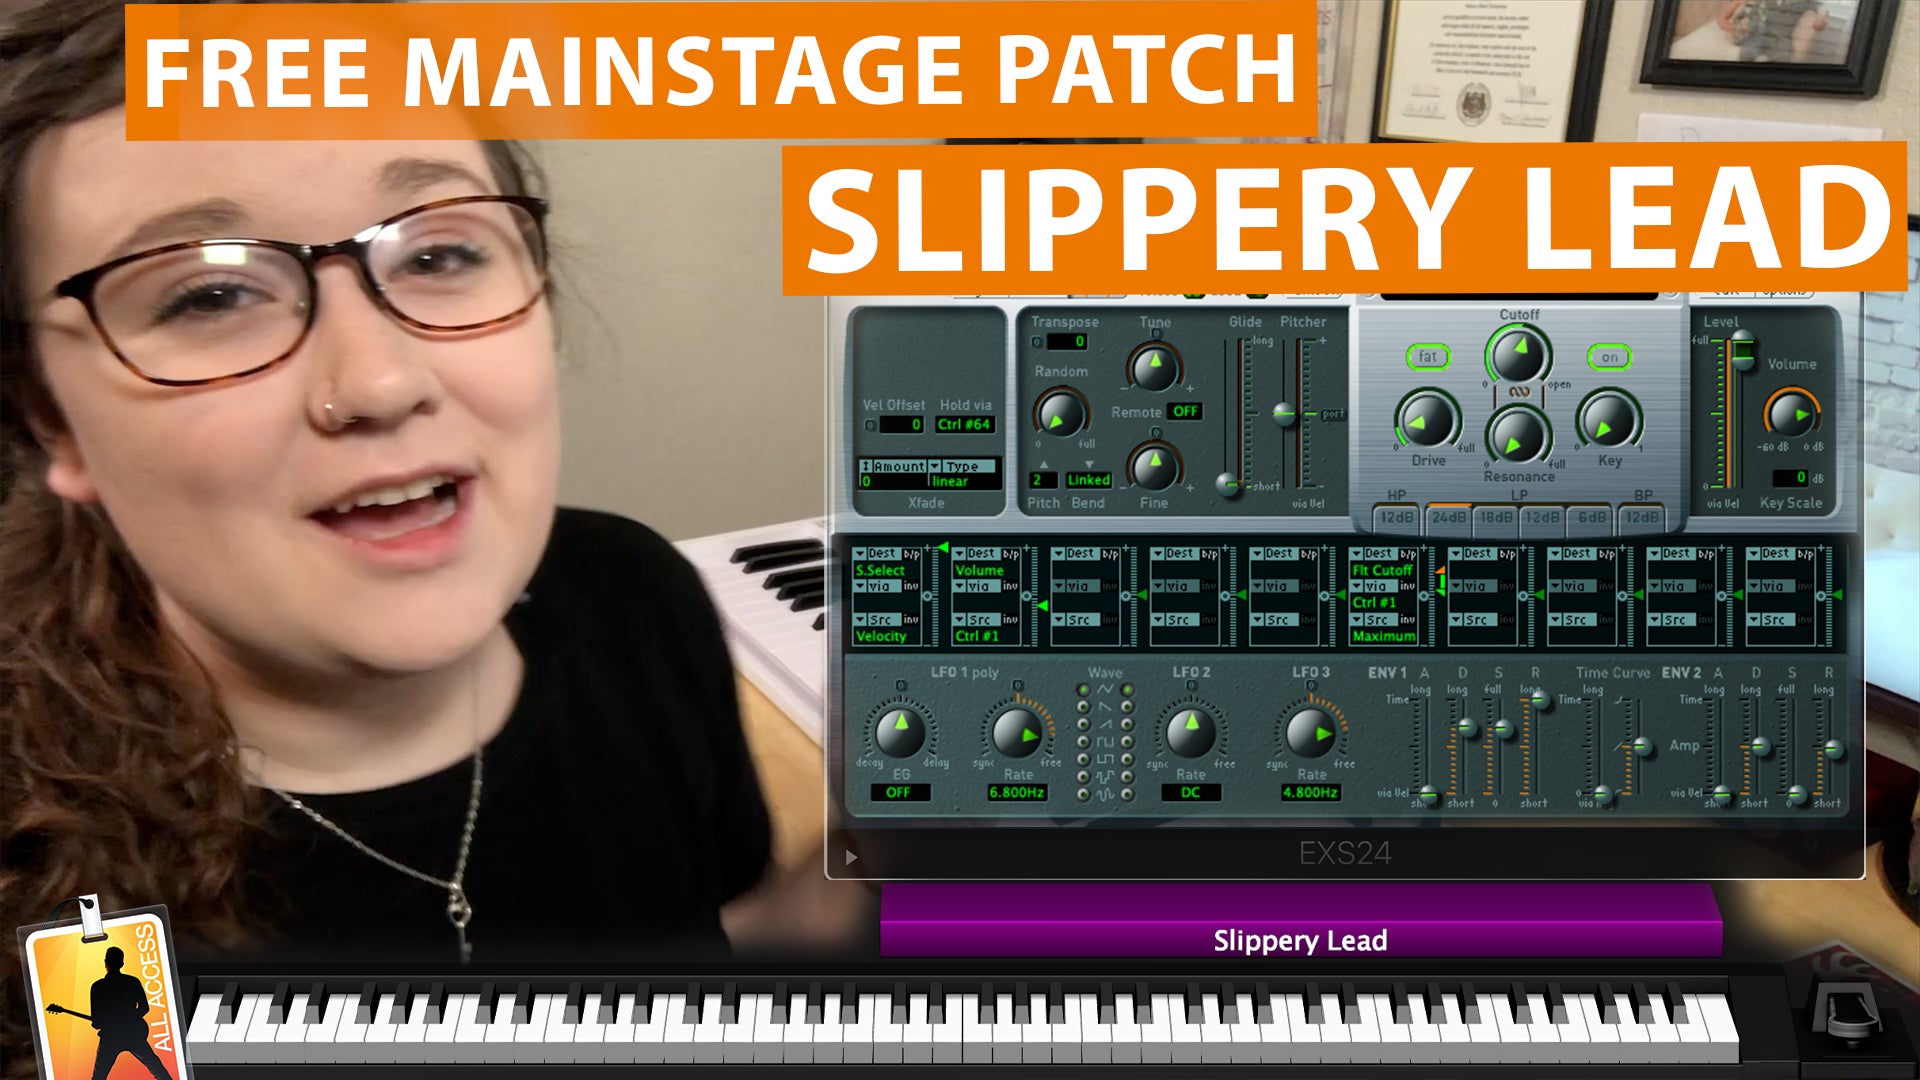 Free MainStage Worship Patch! - Slippery Lead